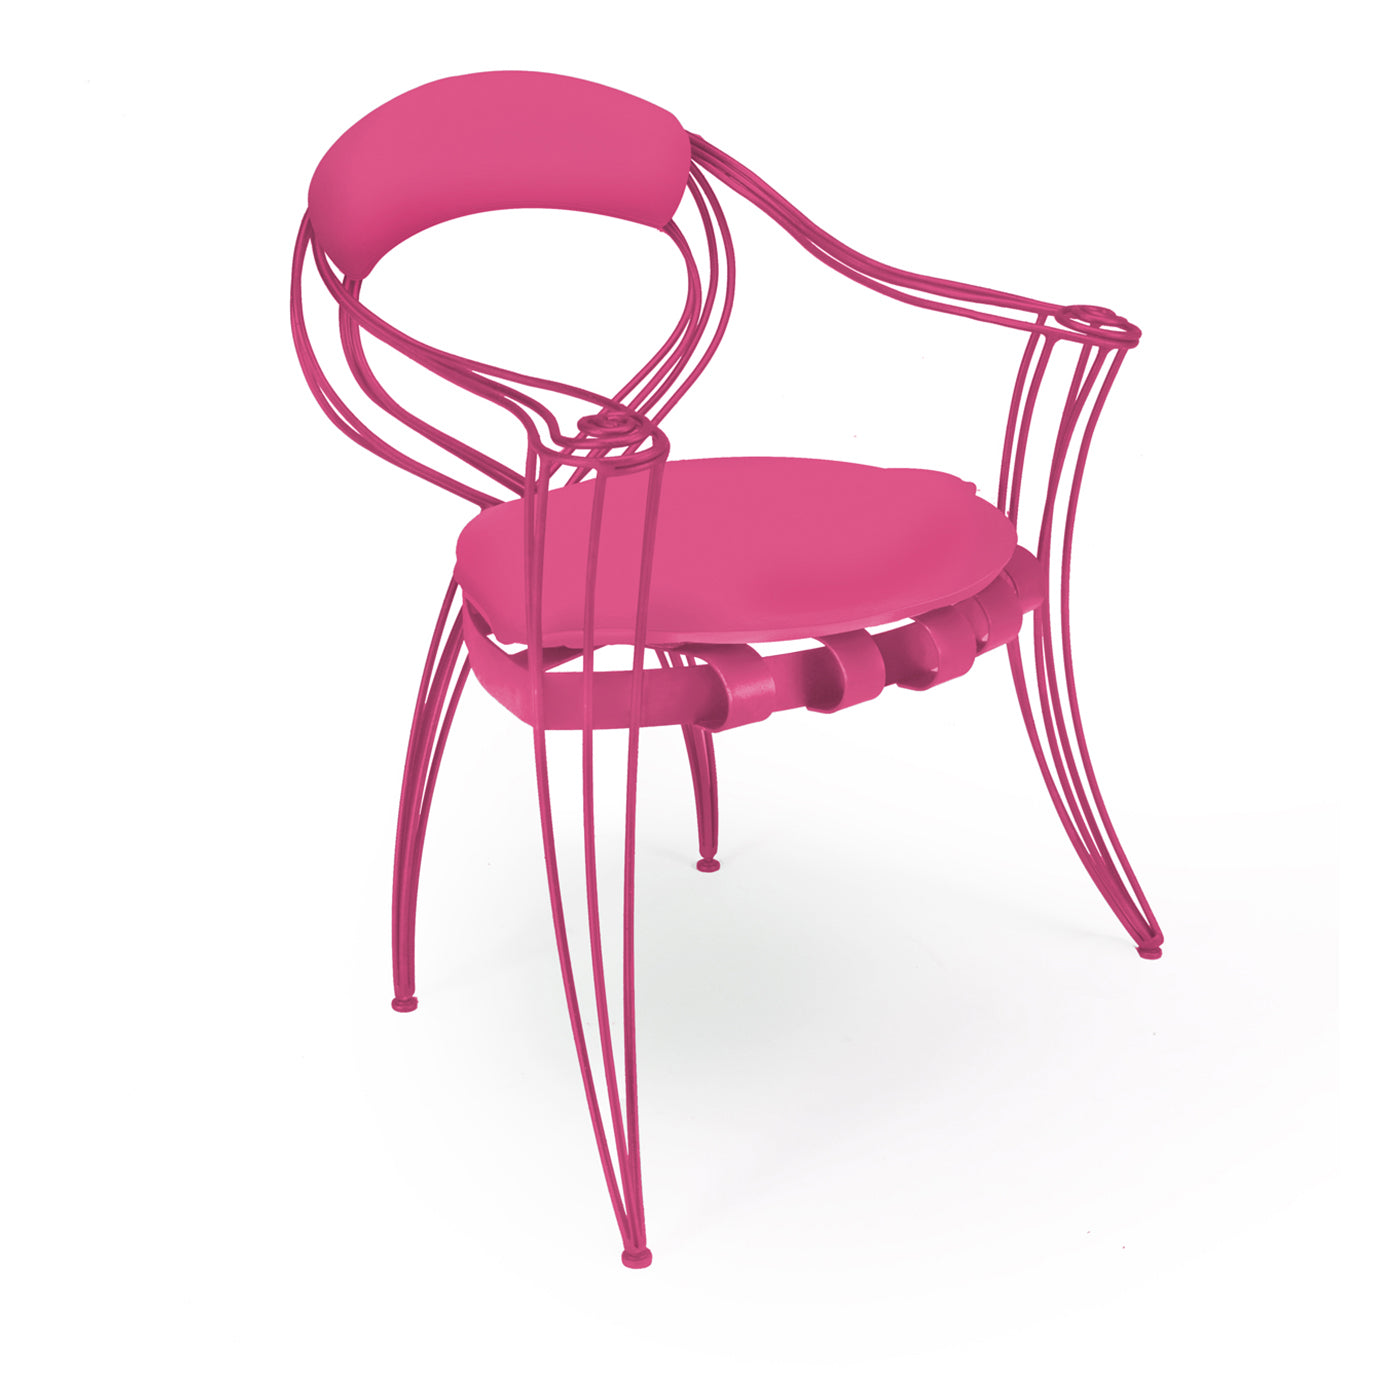 Opus Garden Magenta Chair with Armrests by Carlo Rampazzi - Alternative view 1